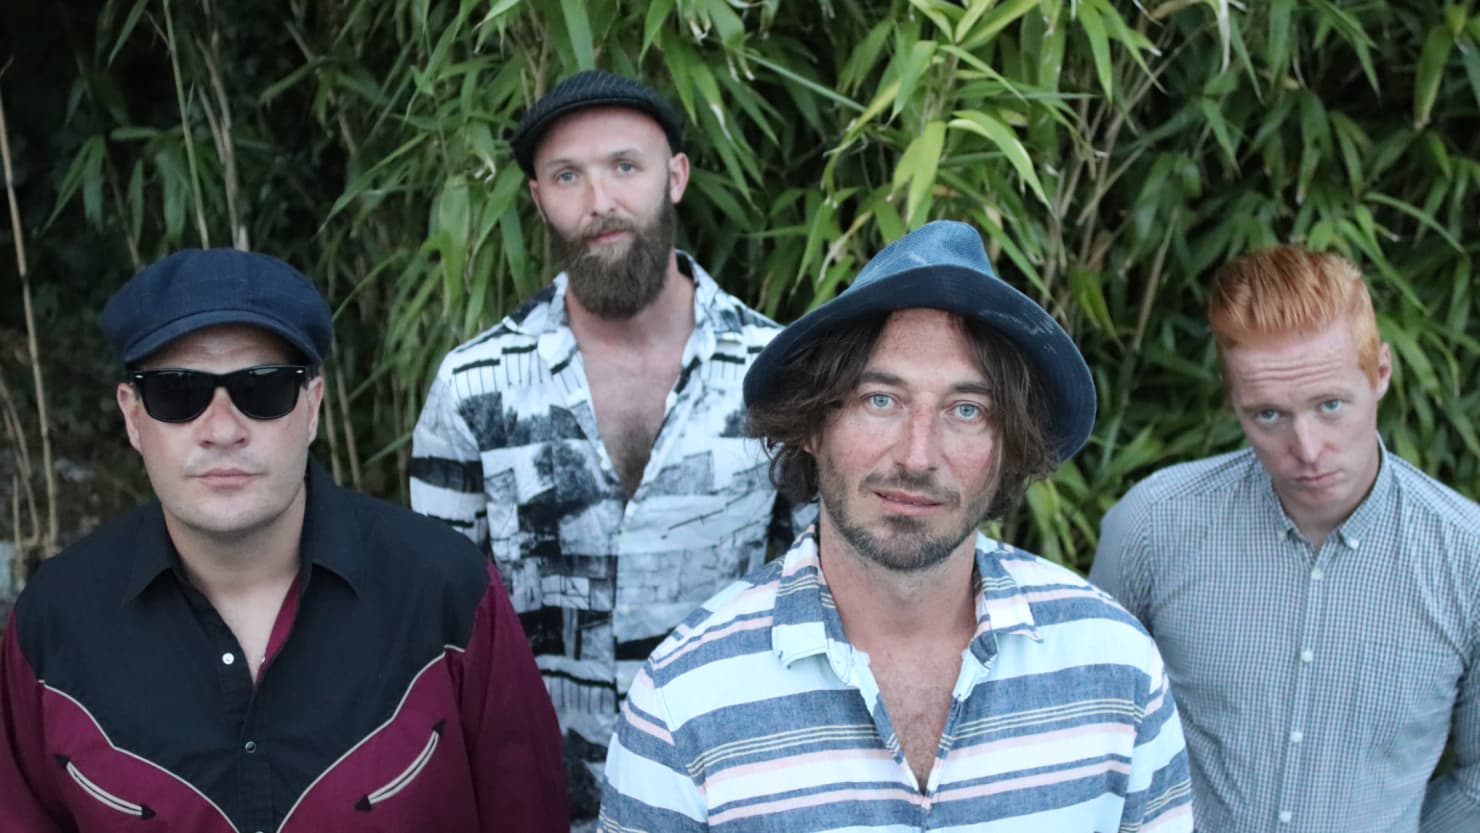 Photograph showing members of Wille and the Bandits band